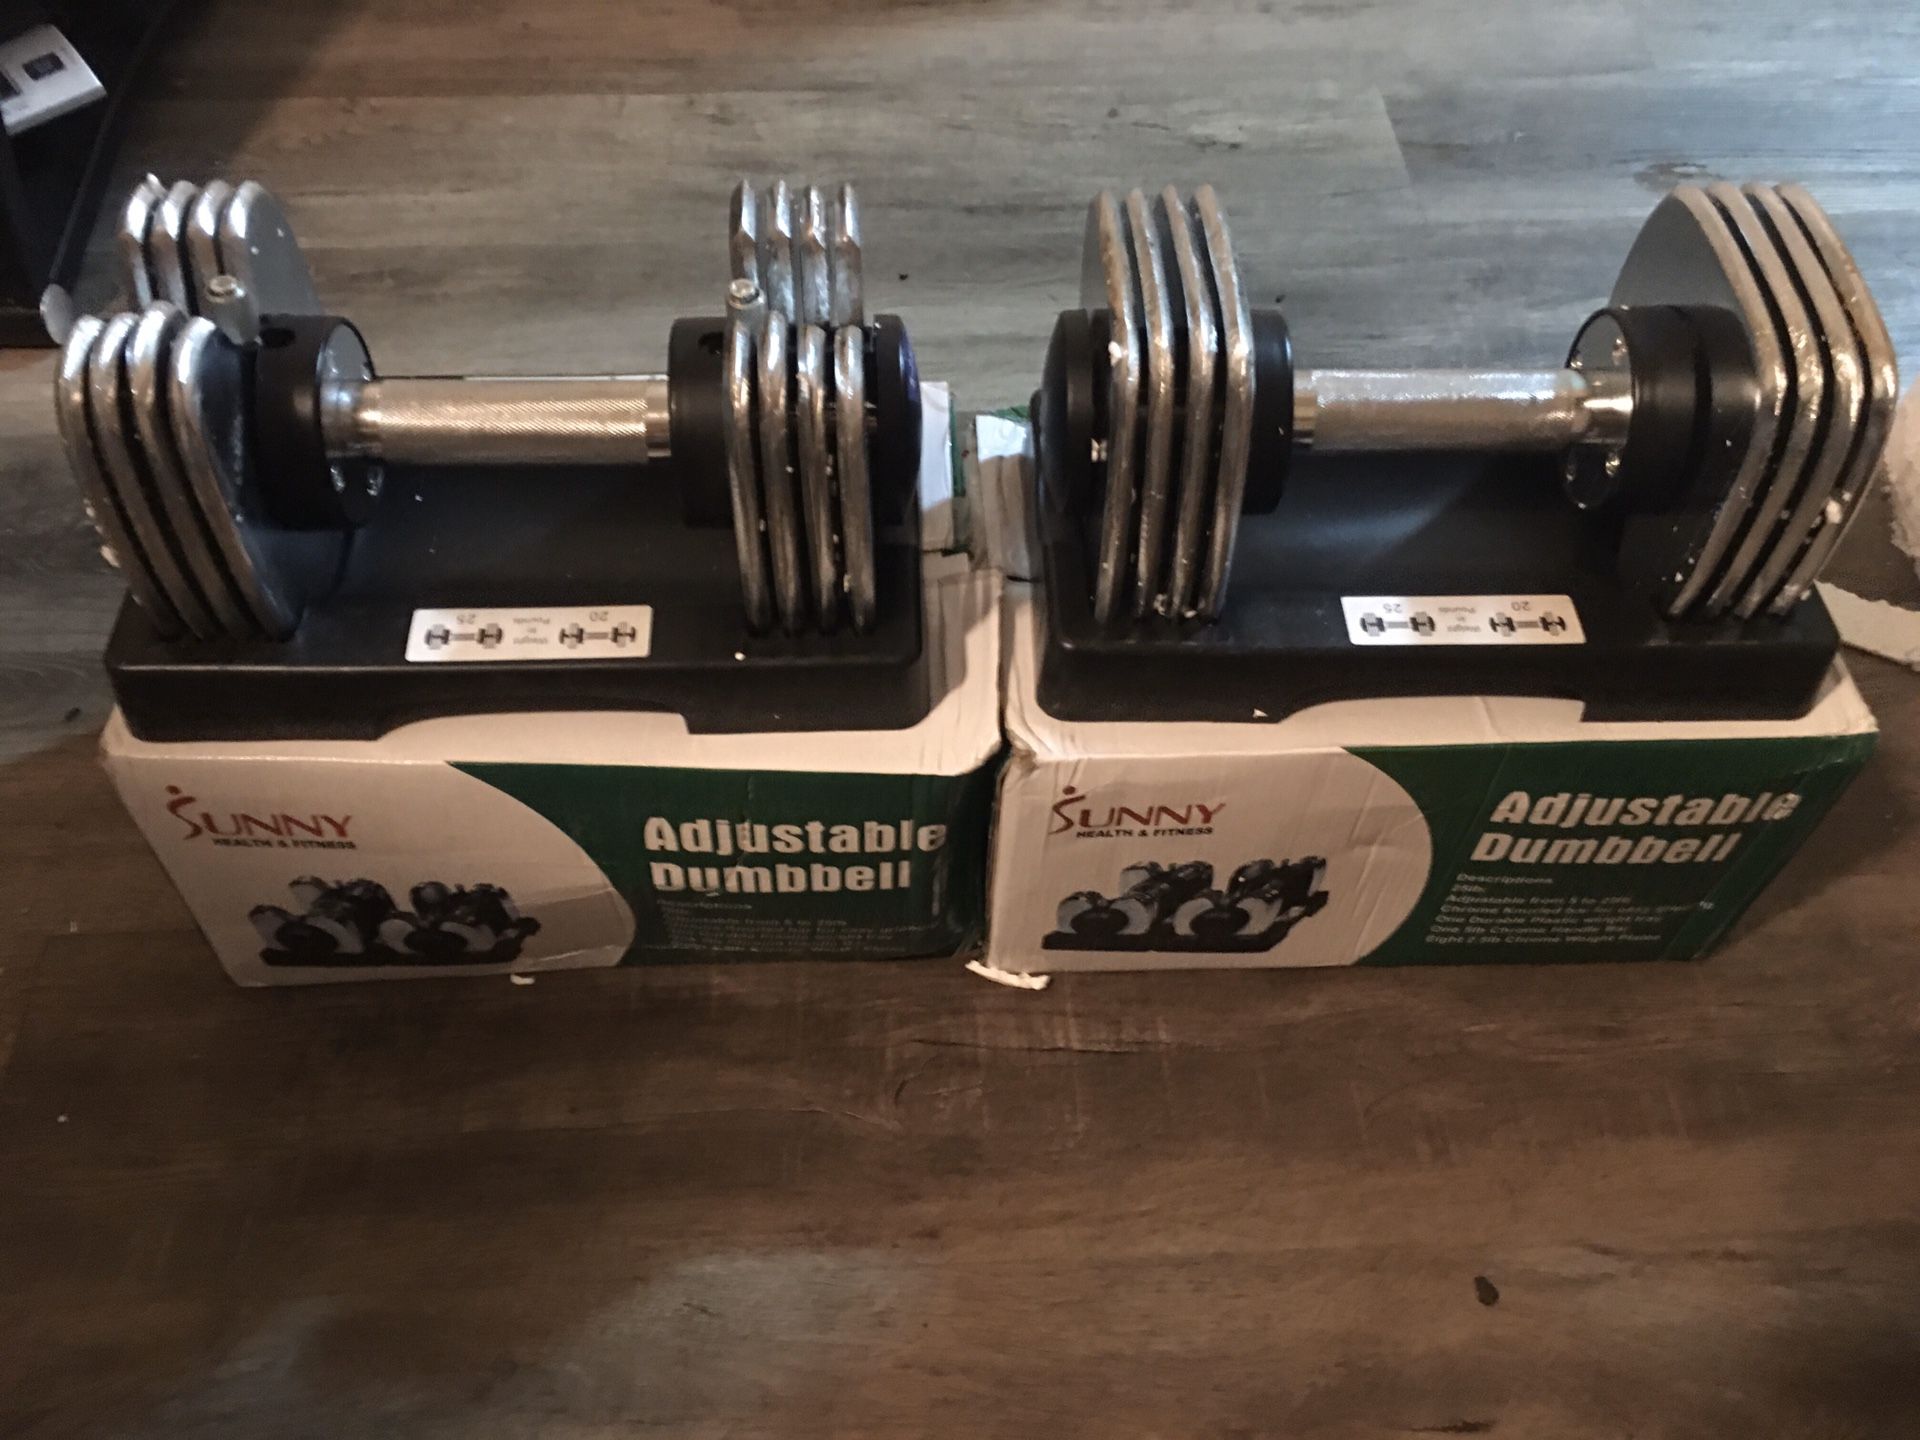 Adjustable dumbells set from 5 to 25 new in box